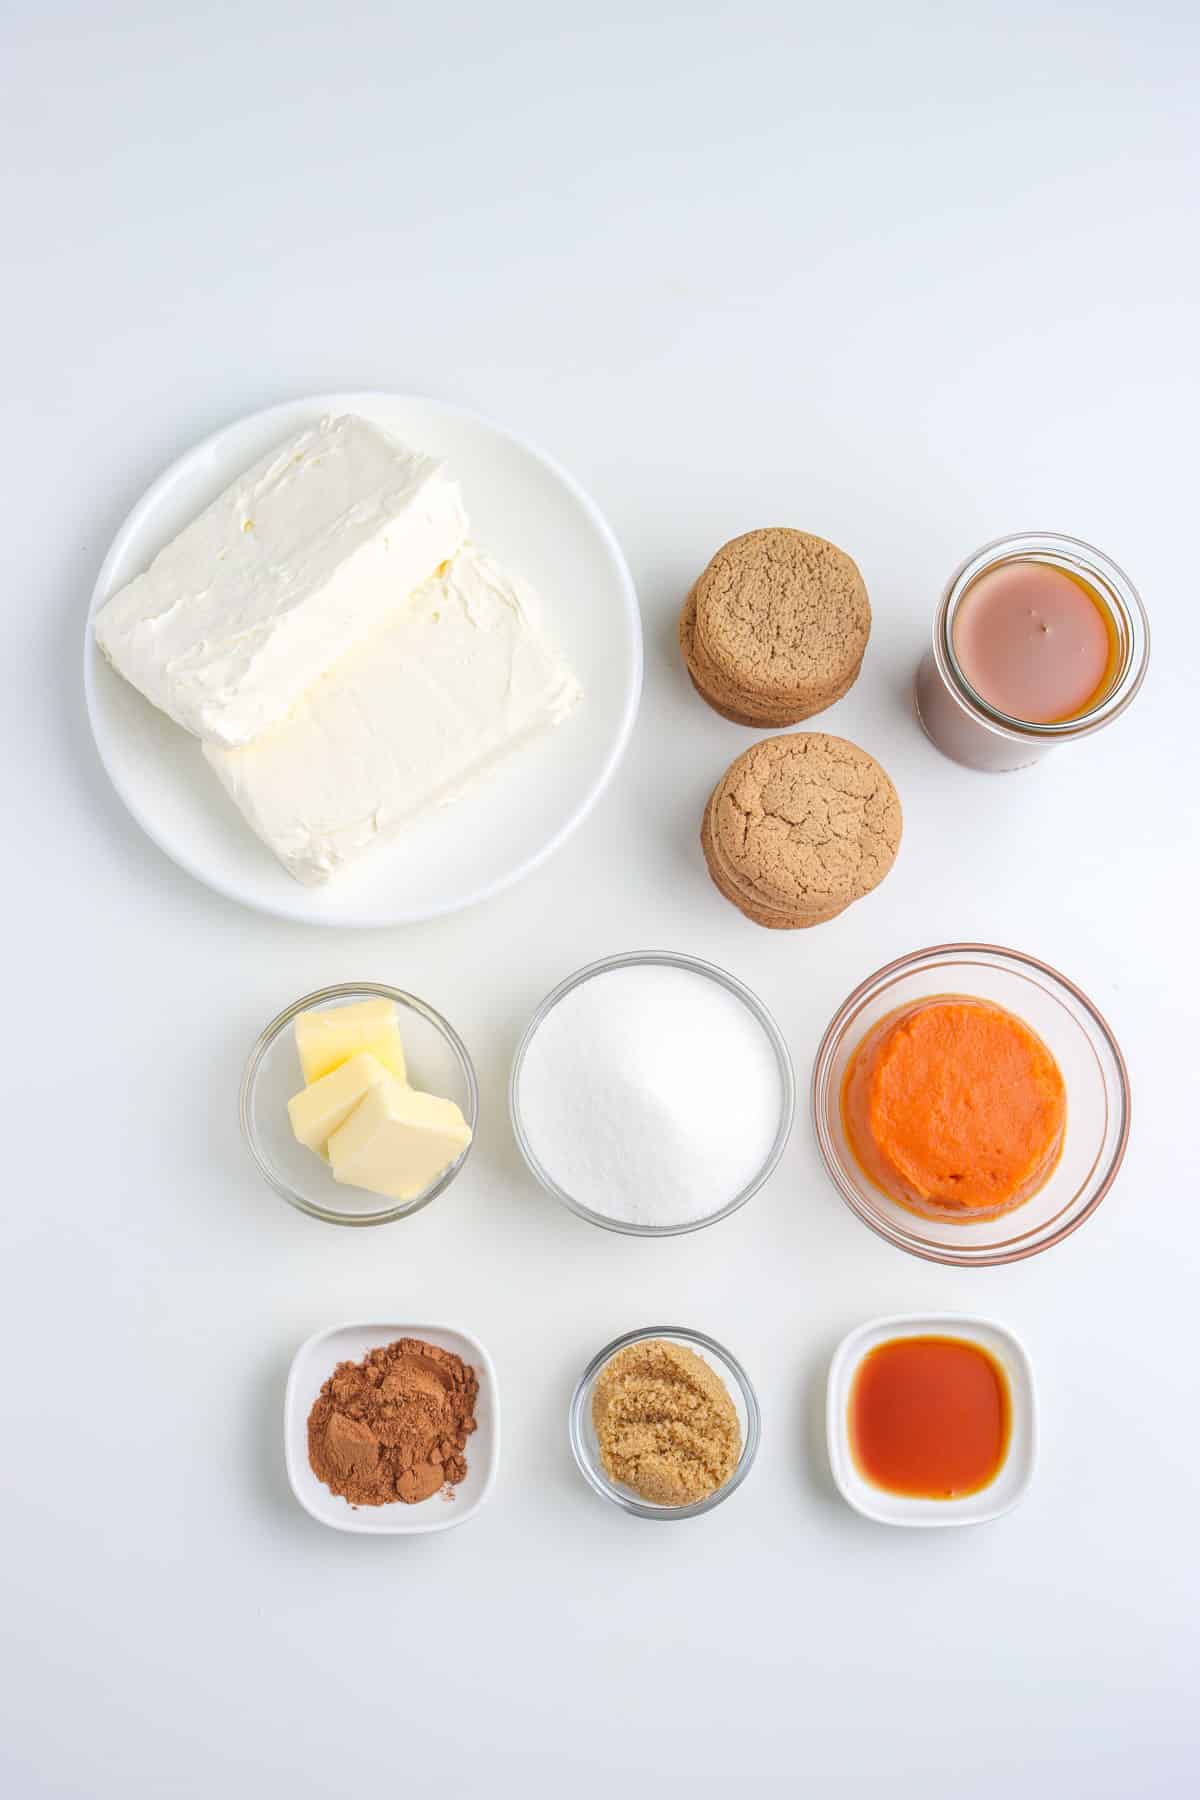 A picture of the ingredients needed to make this recipe.